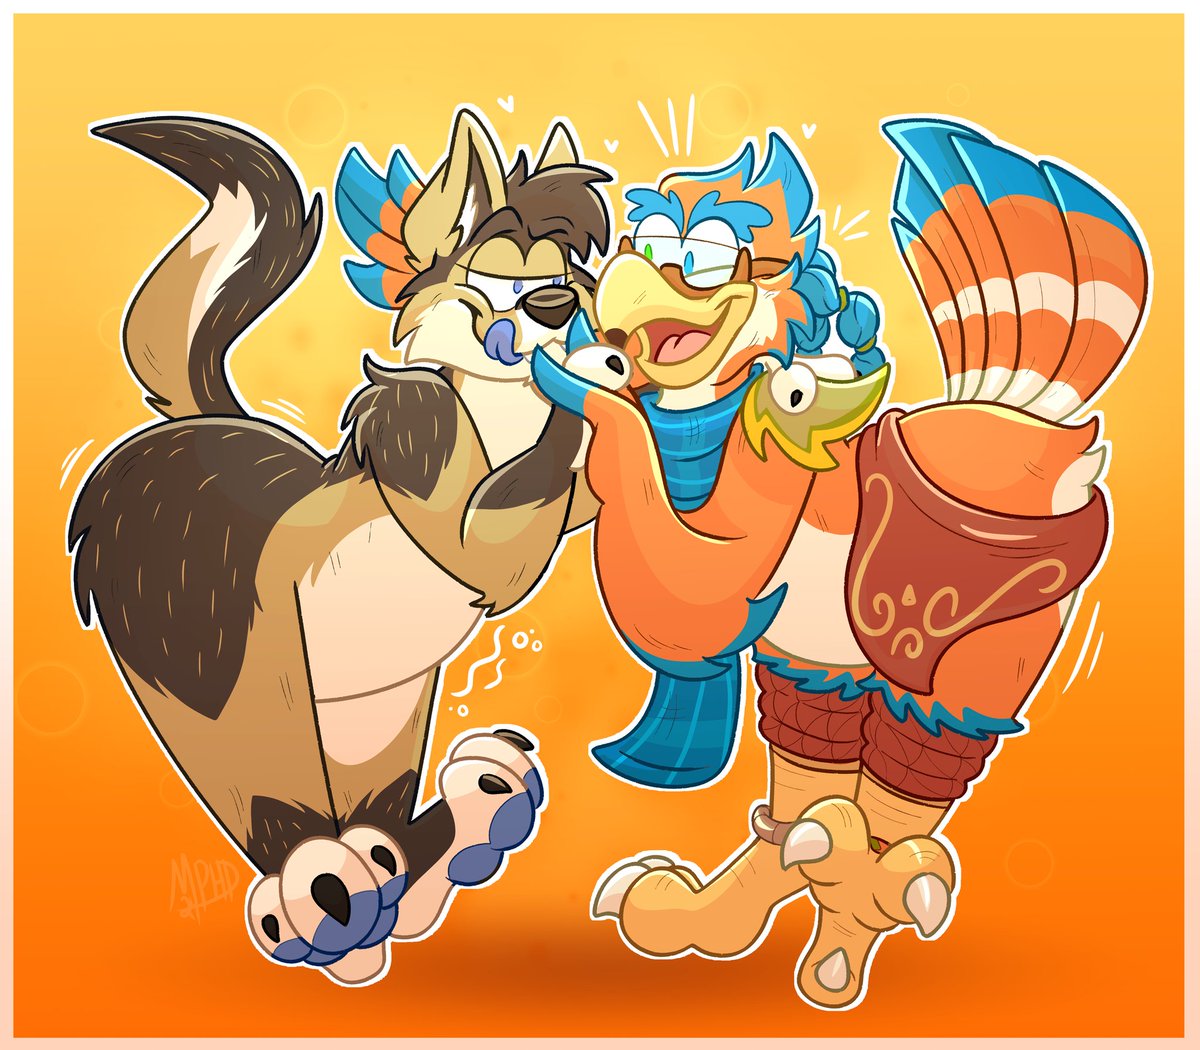 Toony piece for @JustaFluffer of him and Ark dancing the night away! That is.. until Ark gets too hungry!